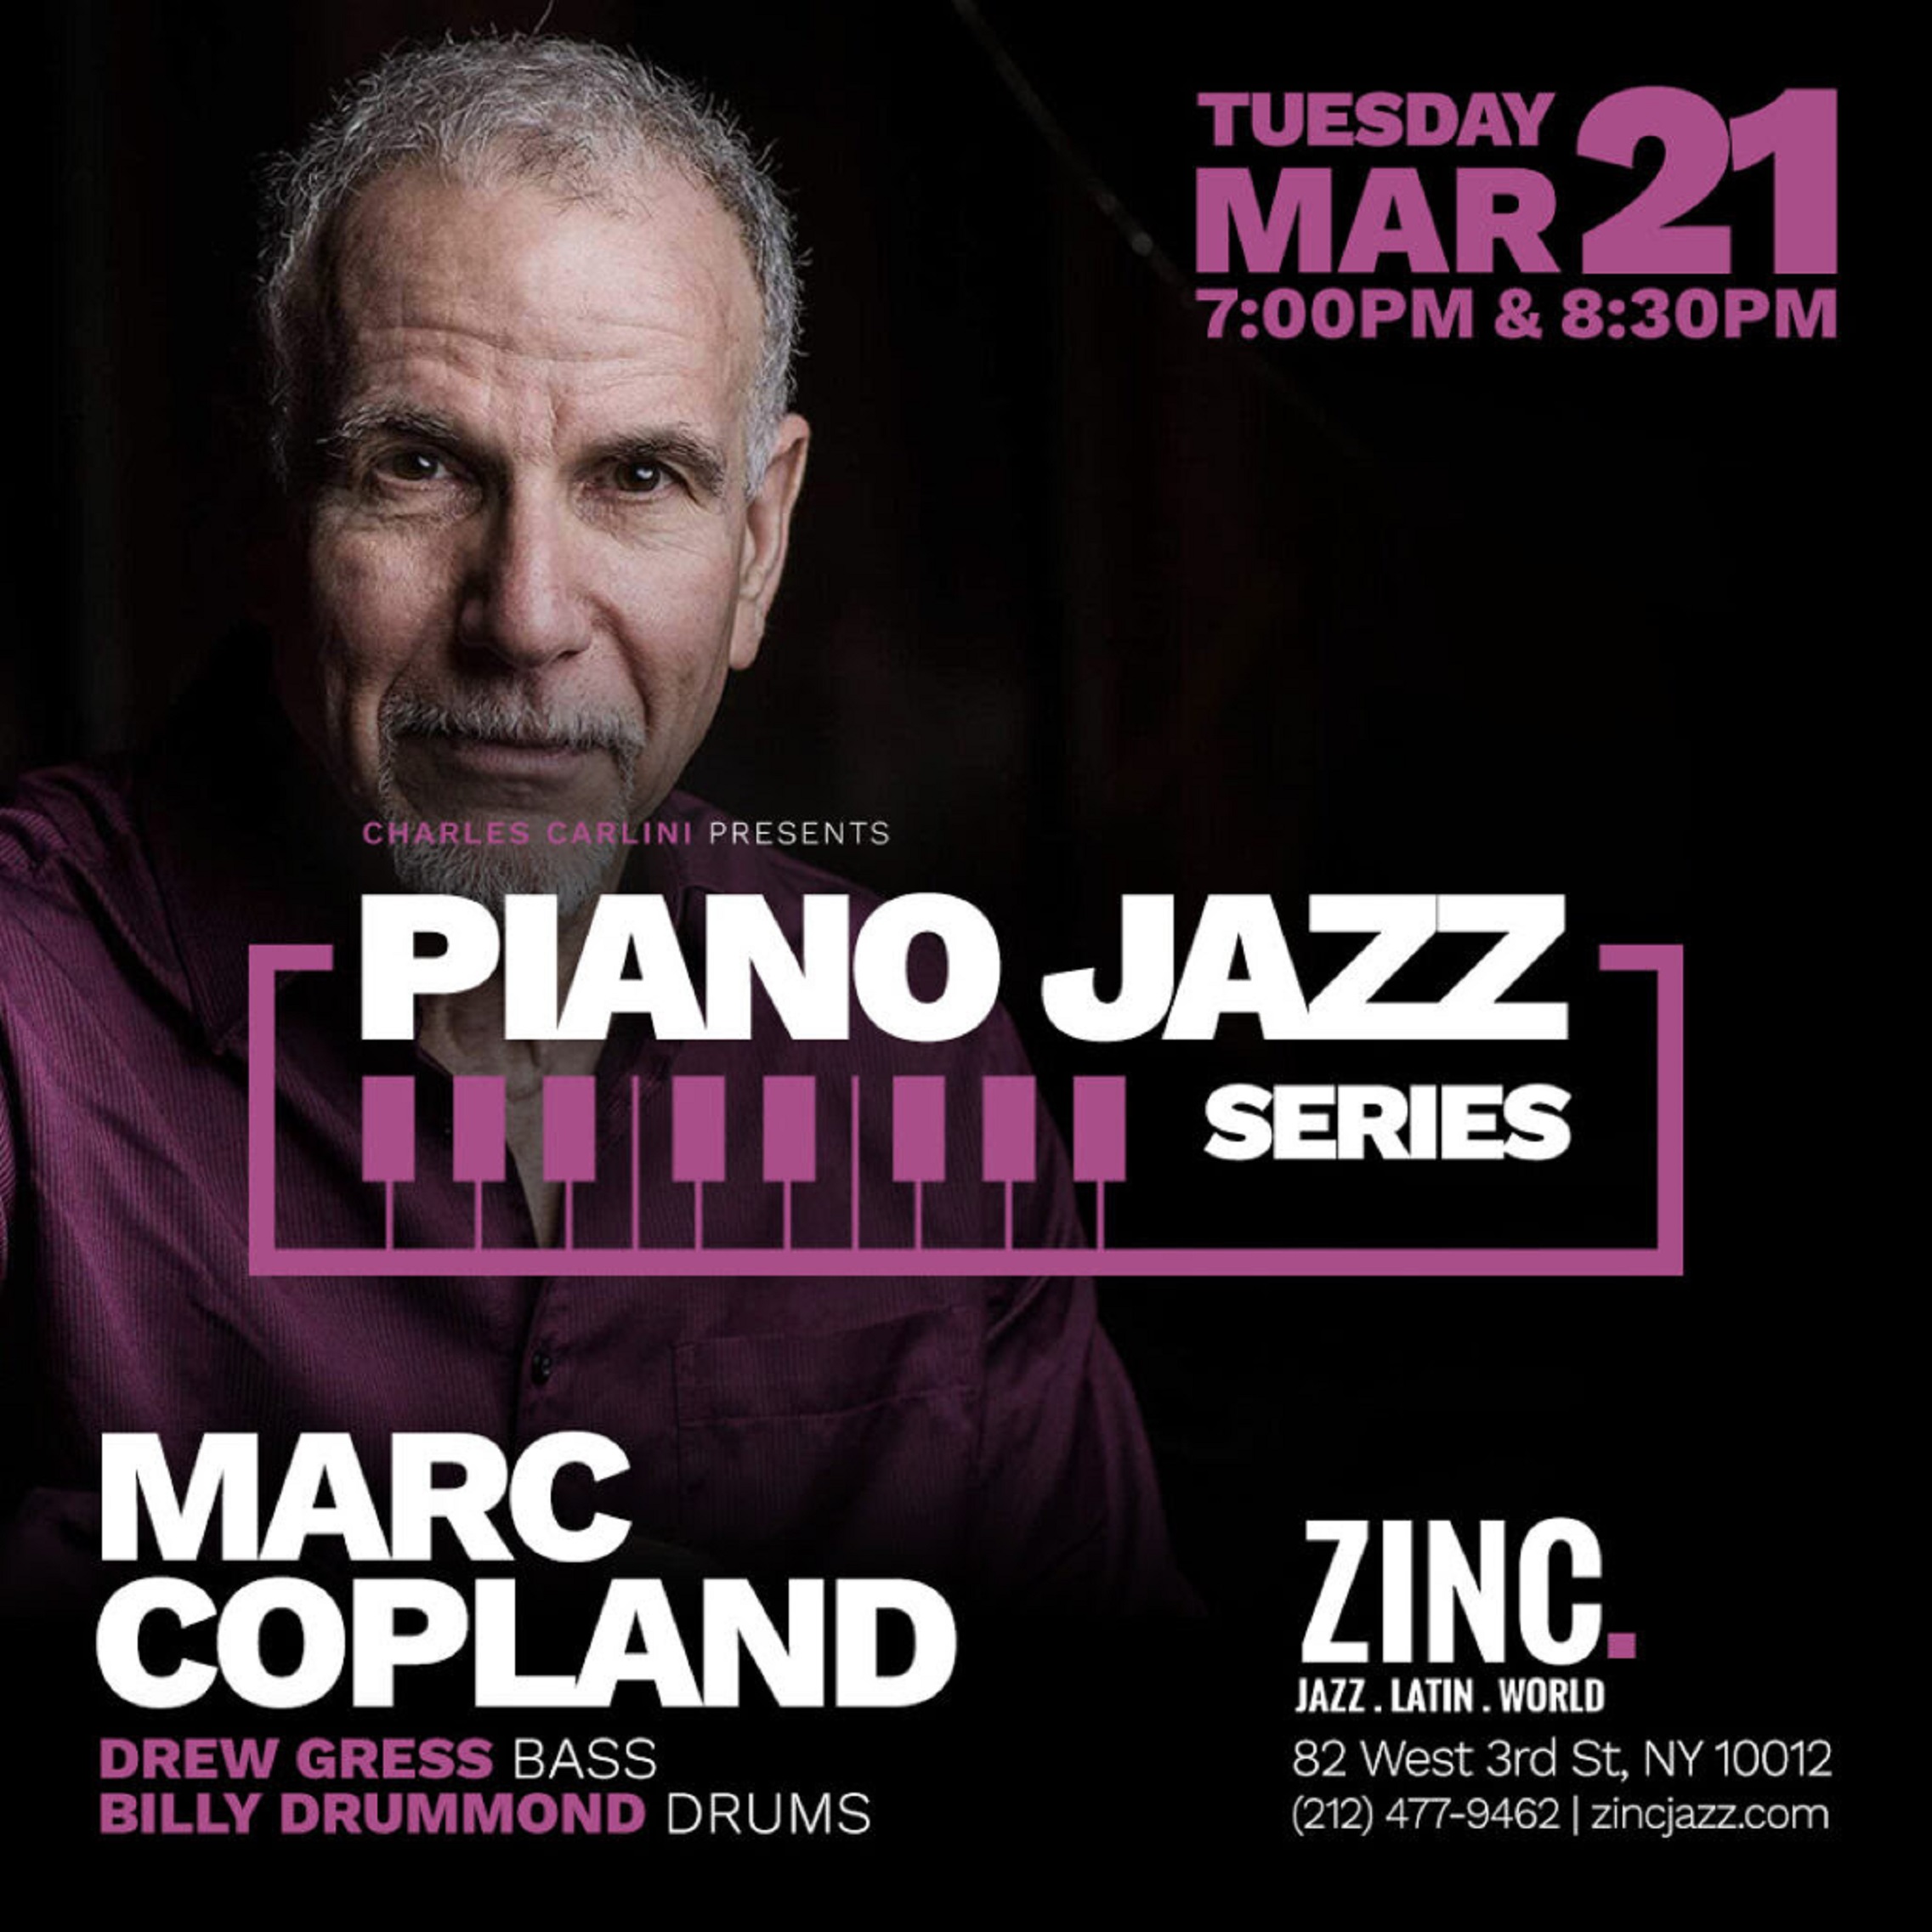 Marc Copland brings his trio to the Zinc for a splendid evening of jazz piano on Tuesday, March 21